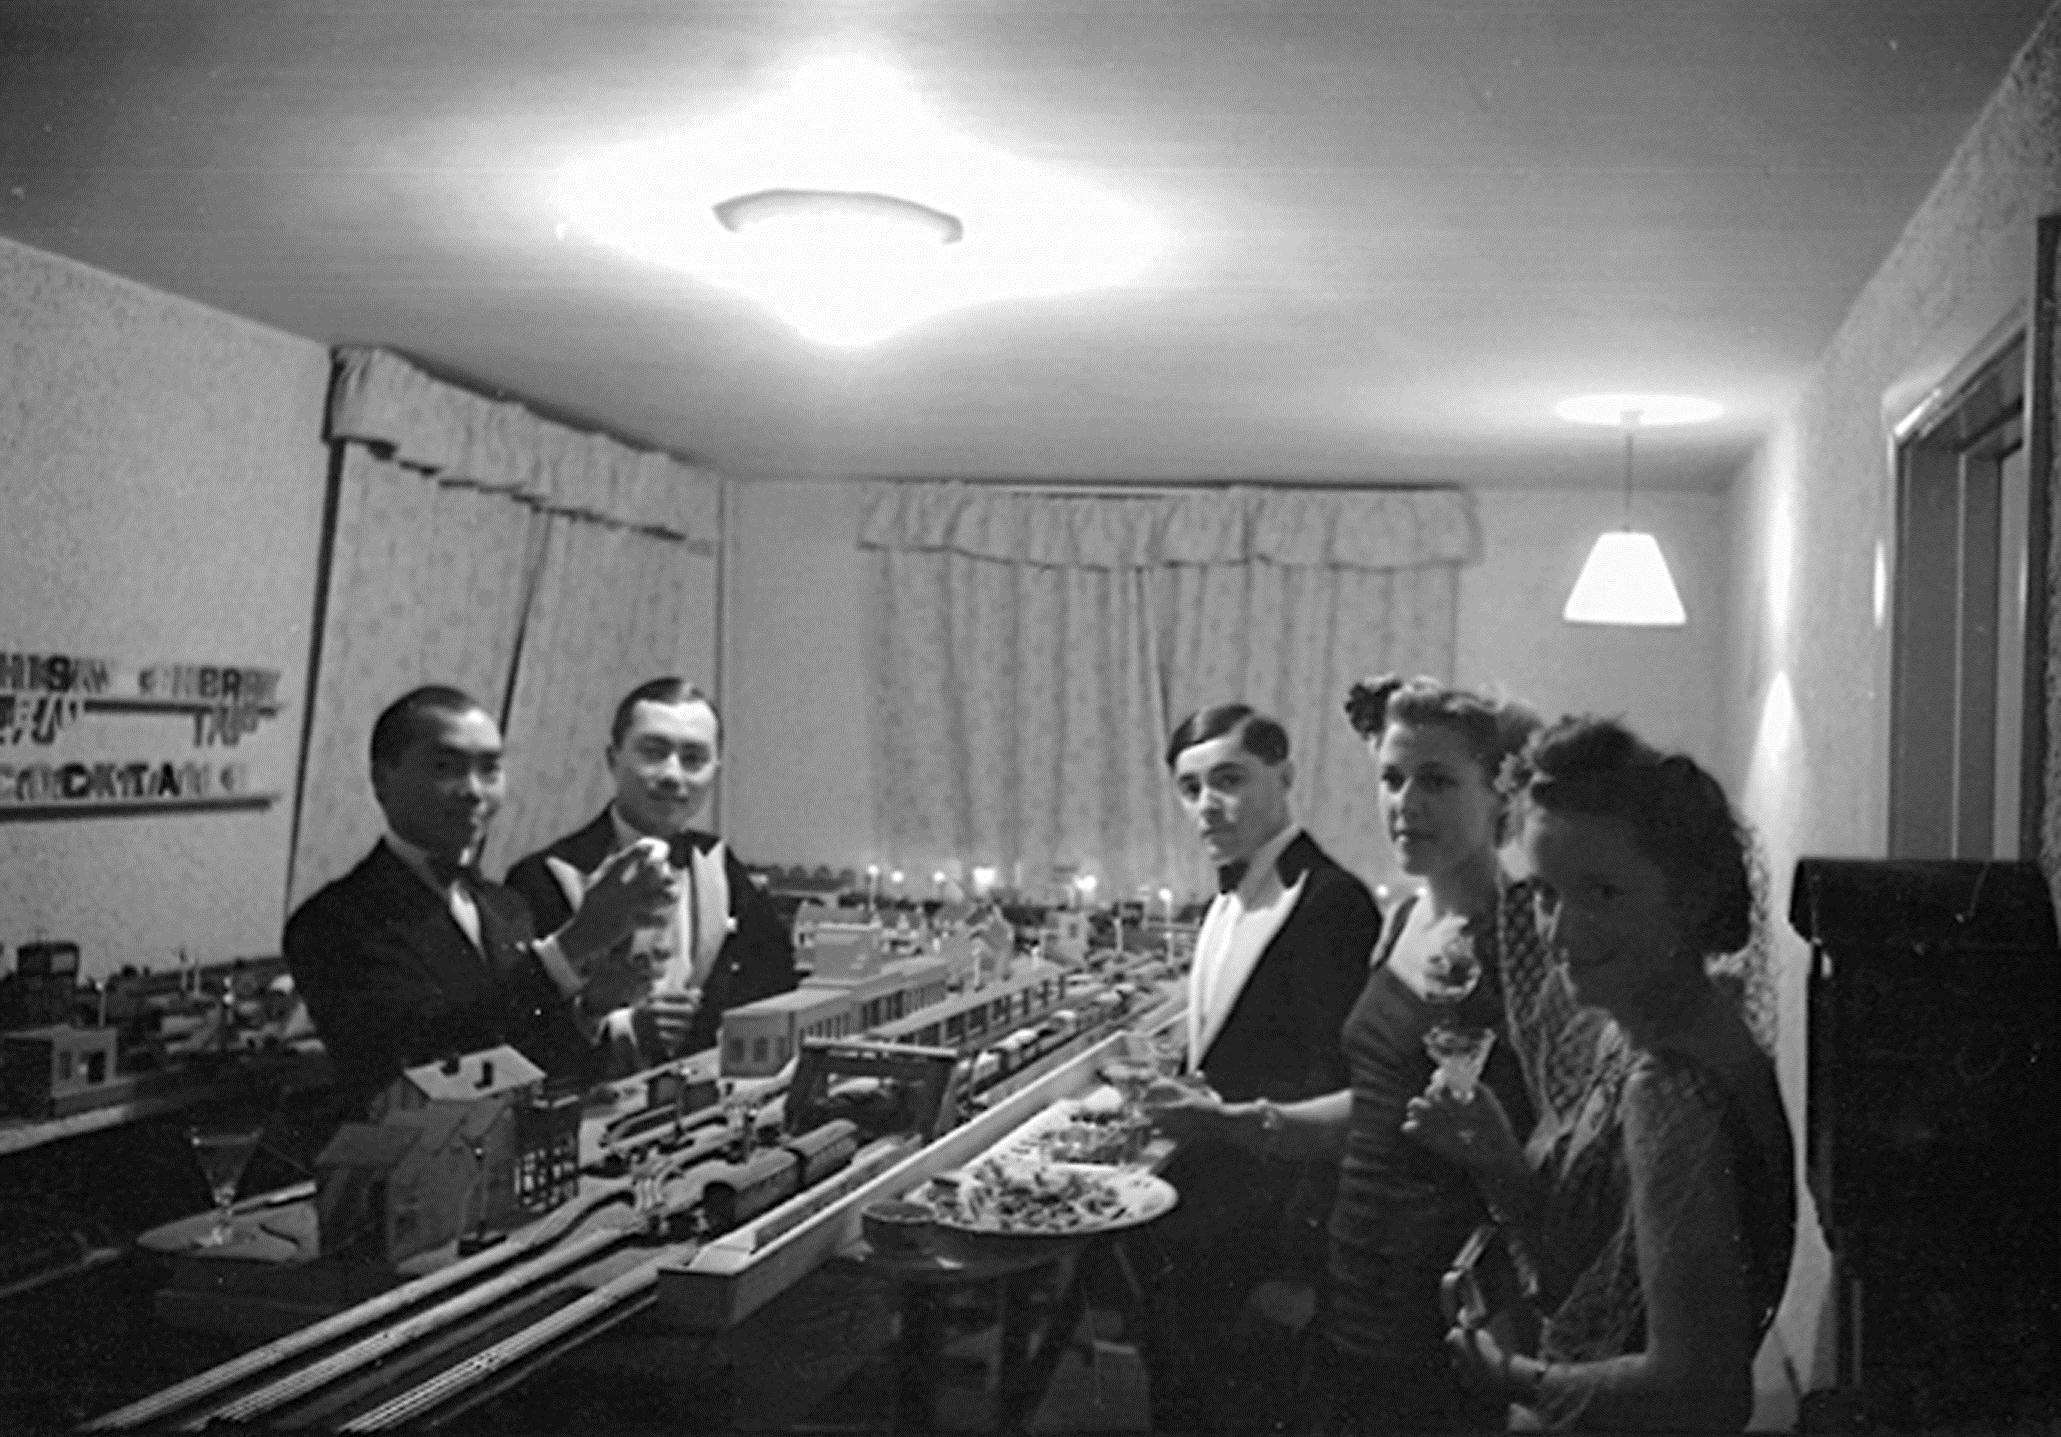 Happy times for the Siamese Princes down in Rock, Cornwall - with their model railway!  Prince Abhas with his older brother Prine Bira, then the senior Prince Chula - and the Princes’ English wives - Ceril and ‘Lisba’